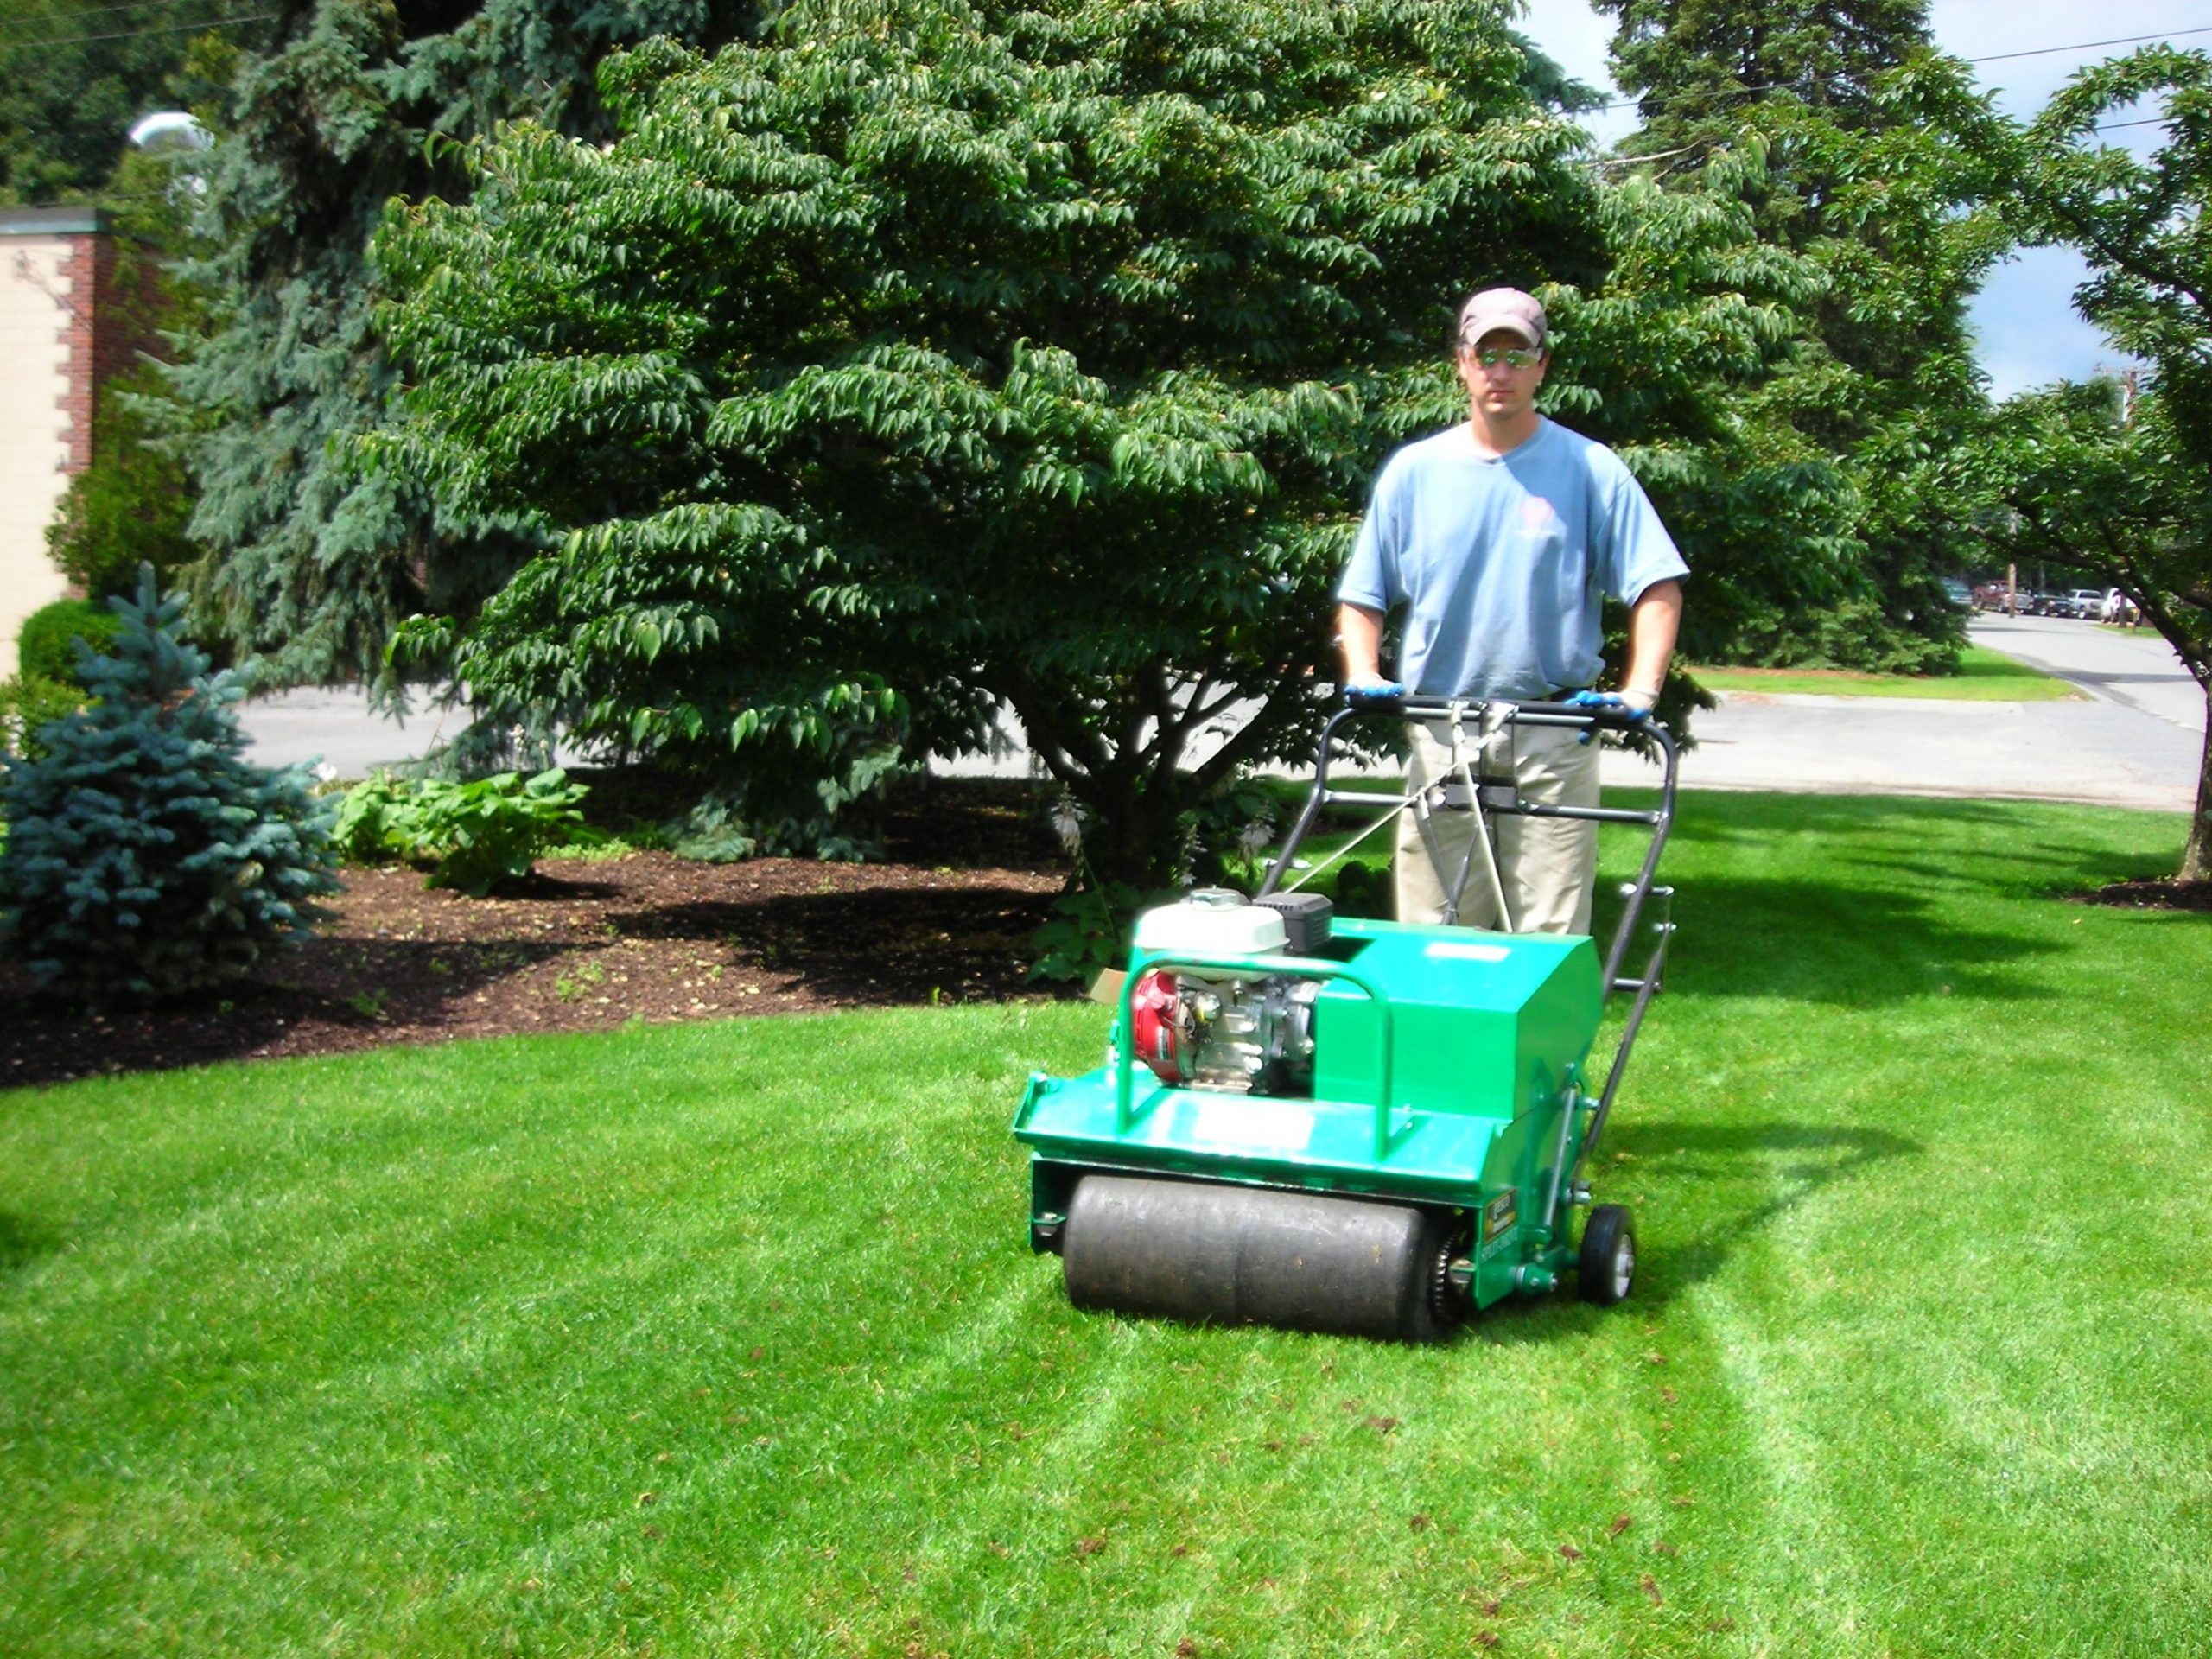 Do you want to achieve a professional lawn care services ...